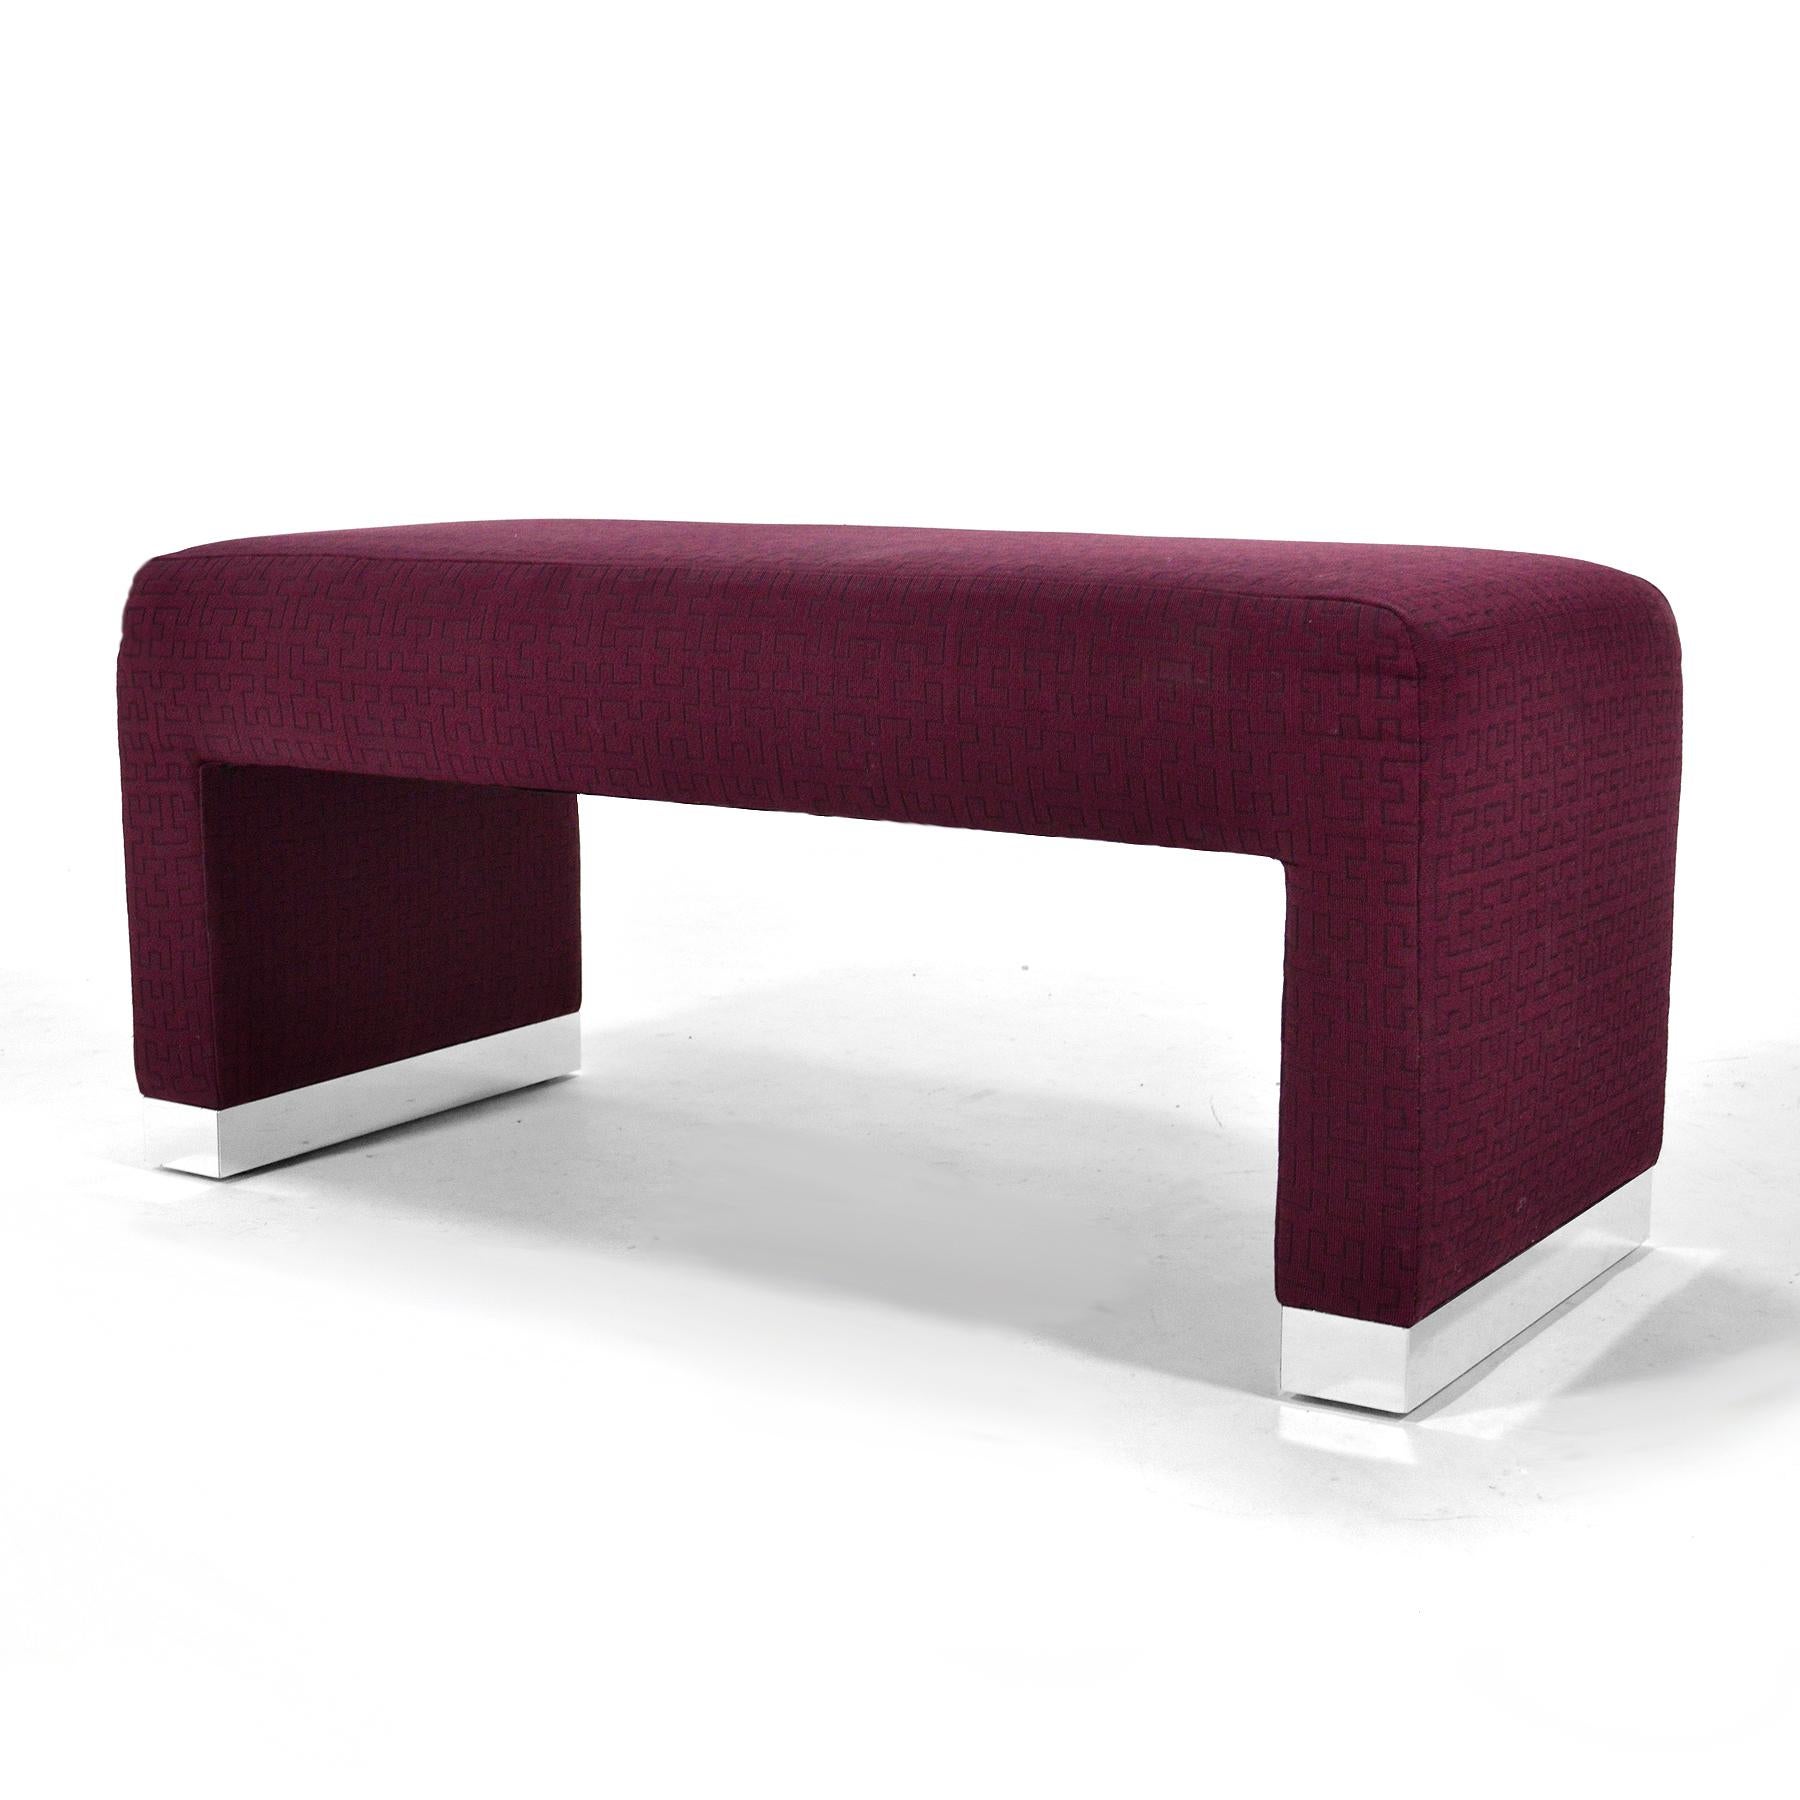 Steel Asher & Cole Upholstered Bench with Chrome Feet